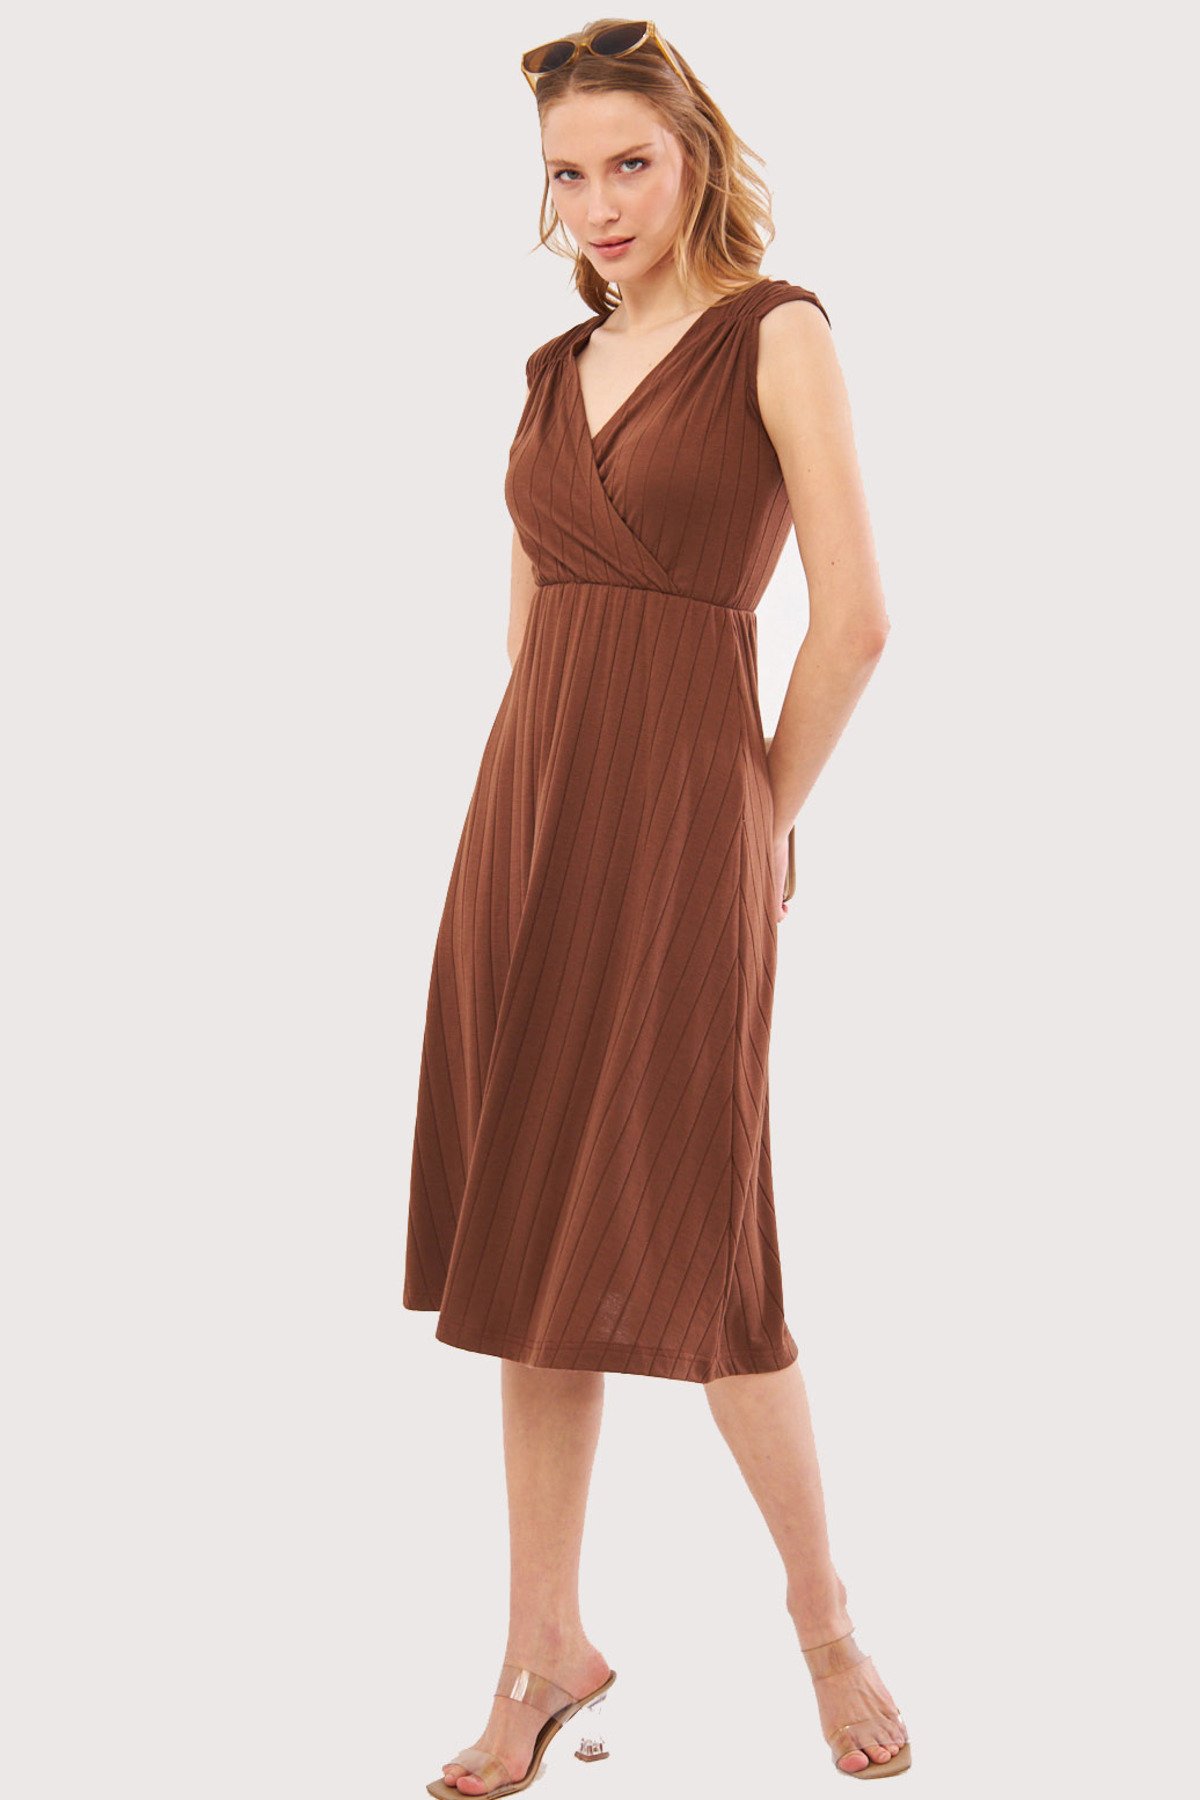 armonika Women's Coffee Waist And Shoulder Elastic Skirt Lined Double Breasted Neck Midi Length Dress